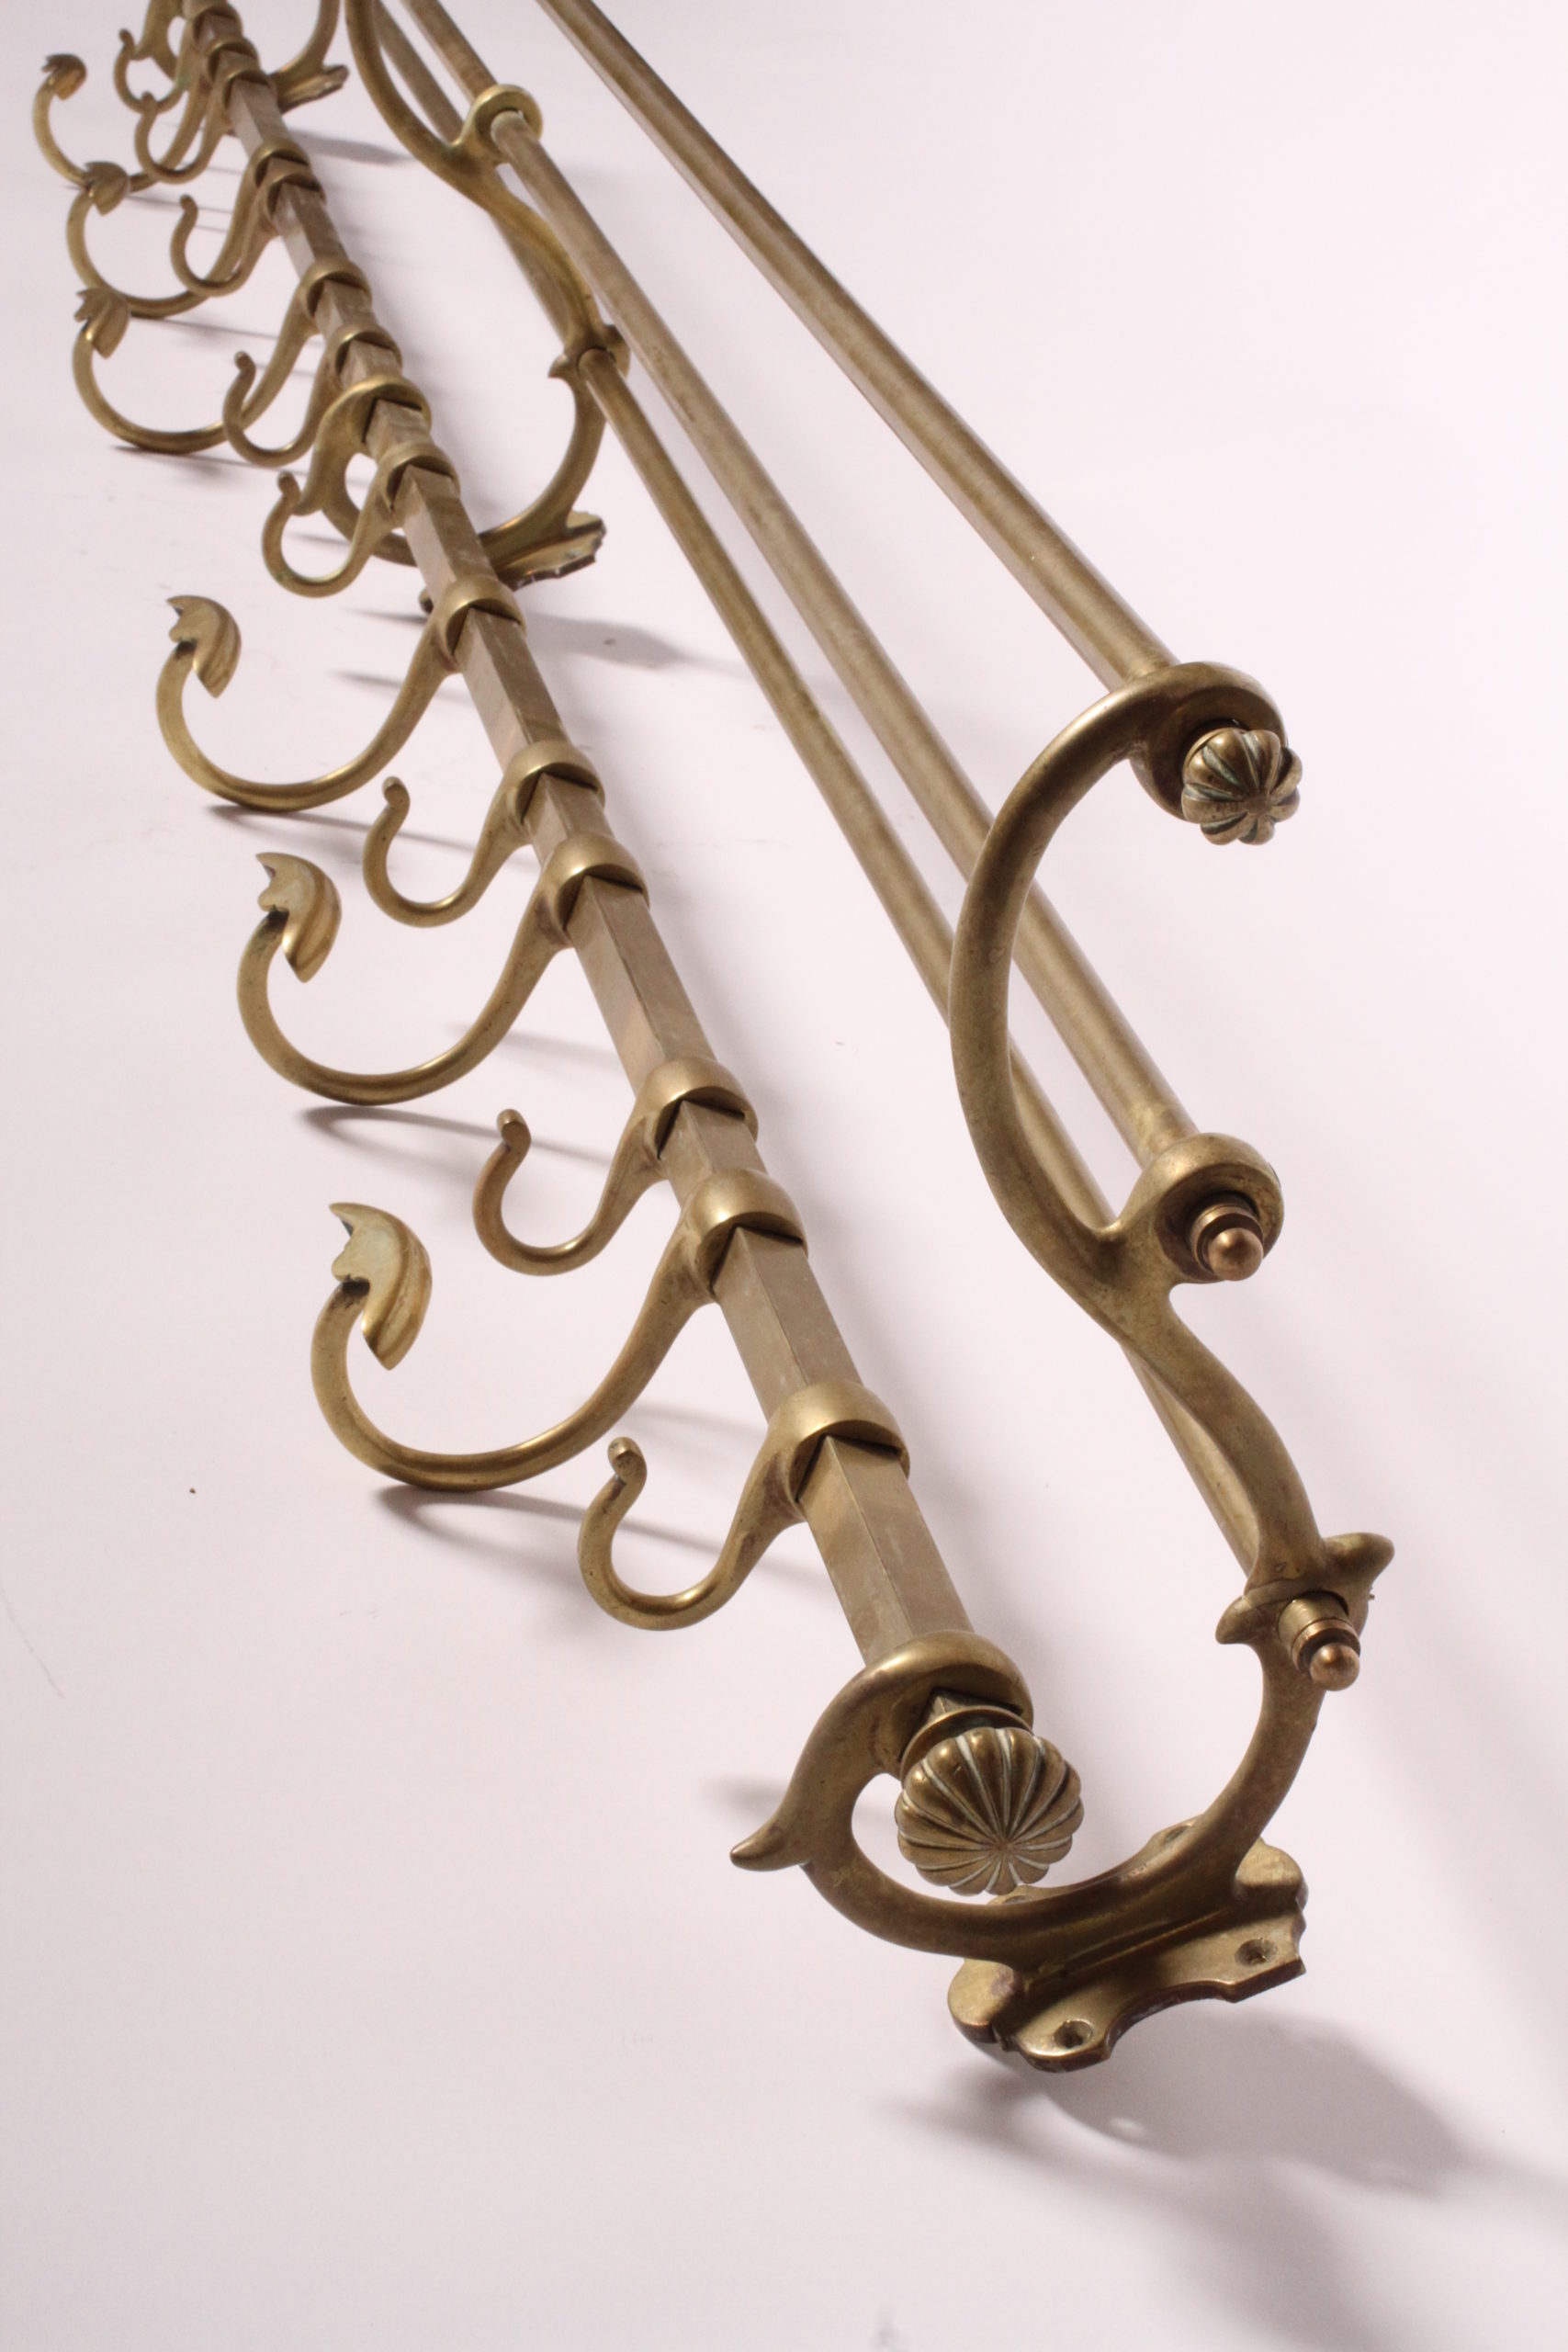 Wick Design 1900's Vintage Brass Wall Mounted Train Luggage and Coat Rack -  Wick Design